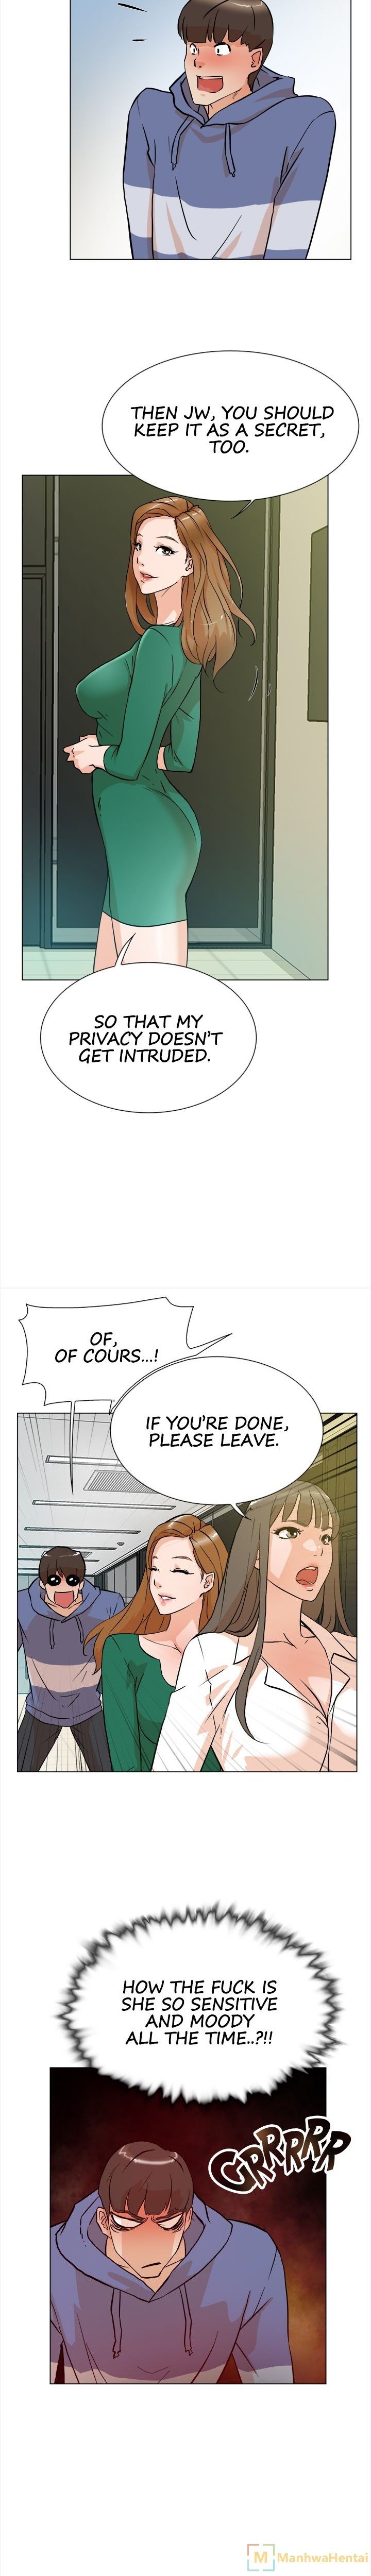 office-affairs-chap-4-5